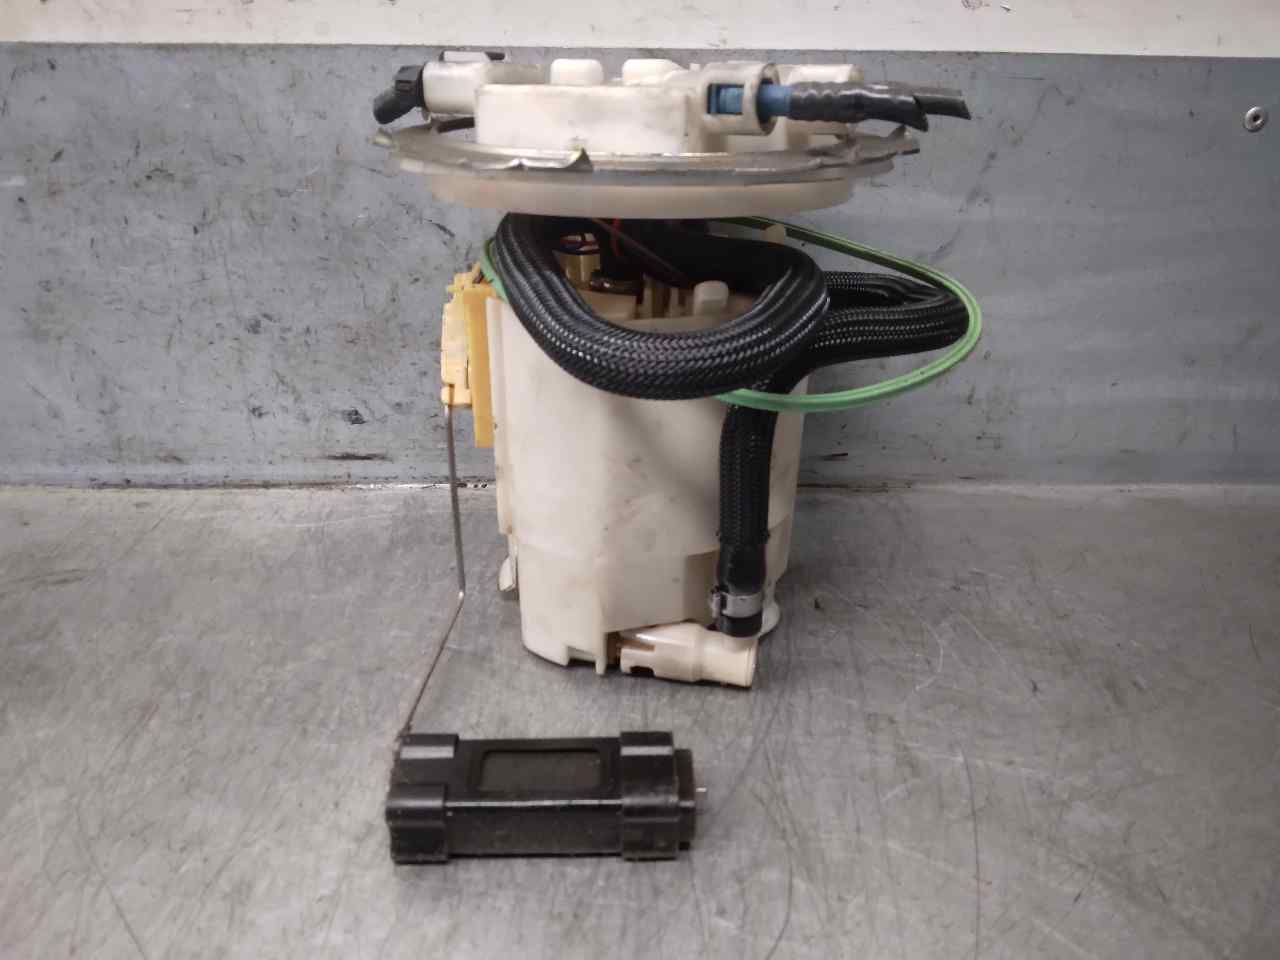 OPEL Vectra 3 generation (2002-2008) Other Control Units 228216003004, AA06122020400, VDO 23756608